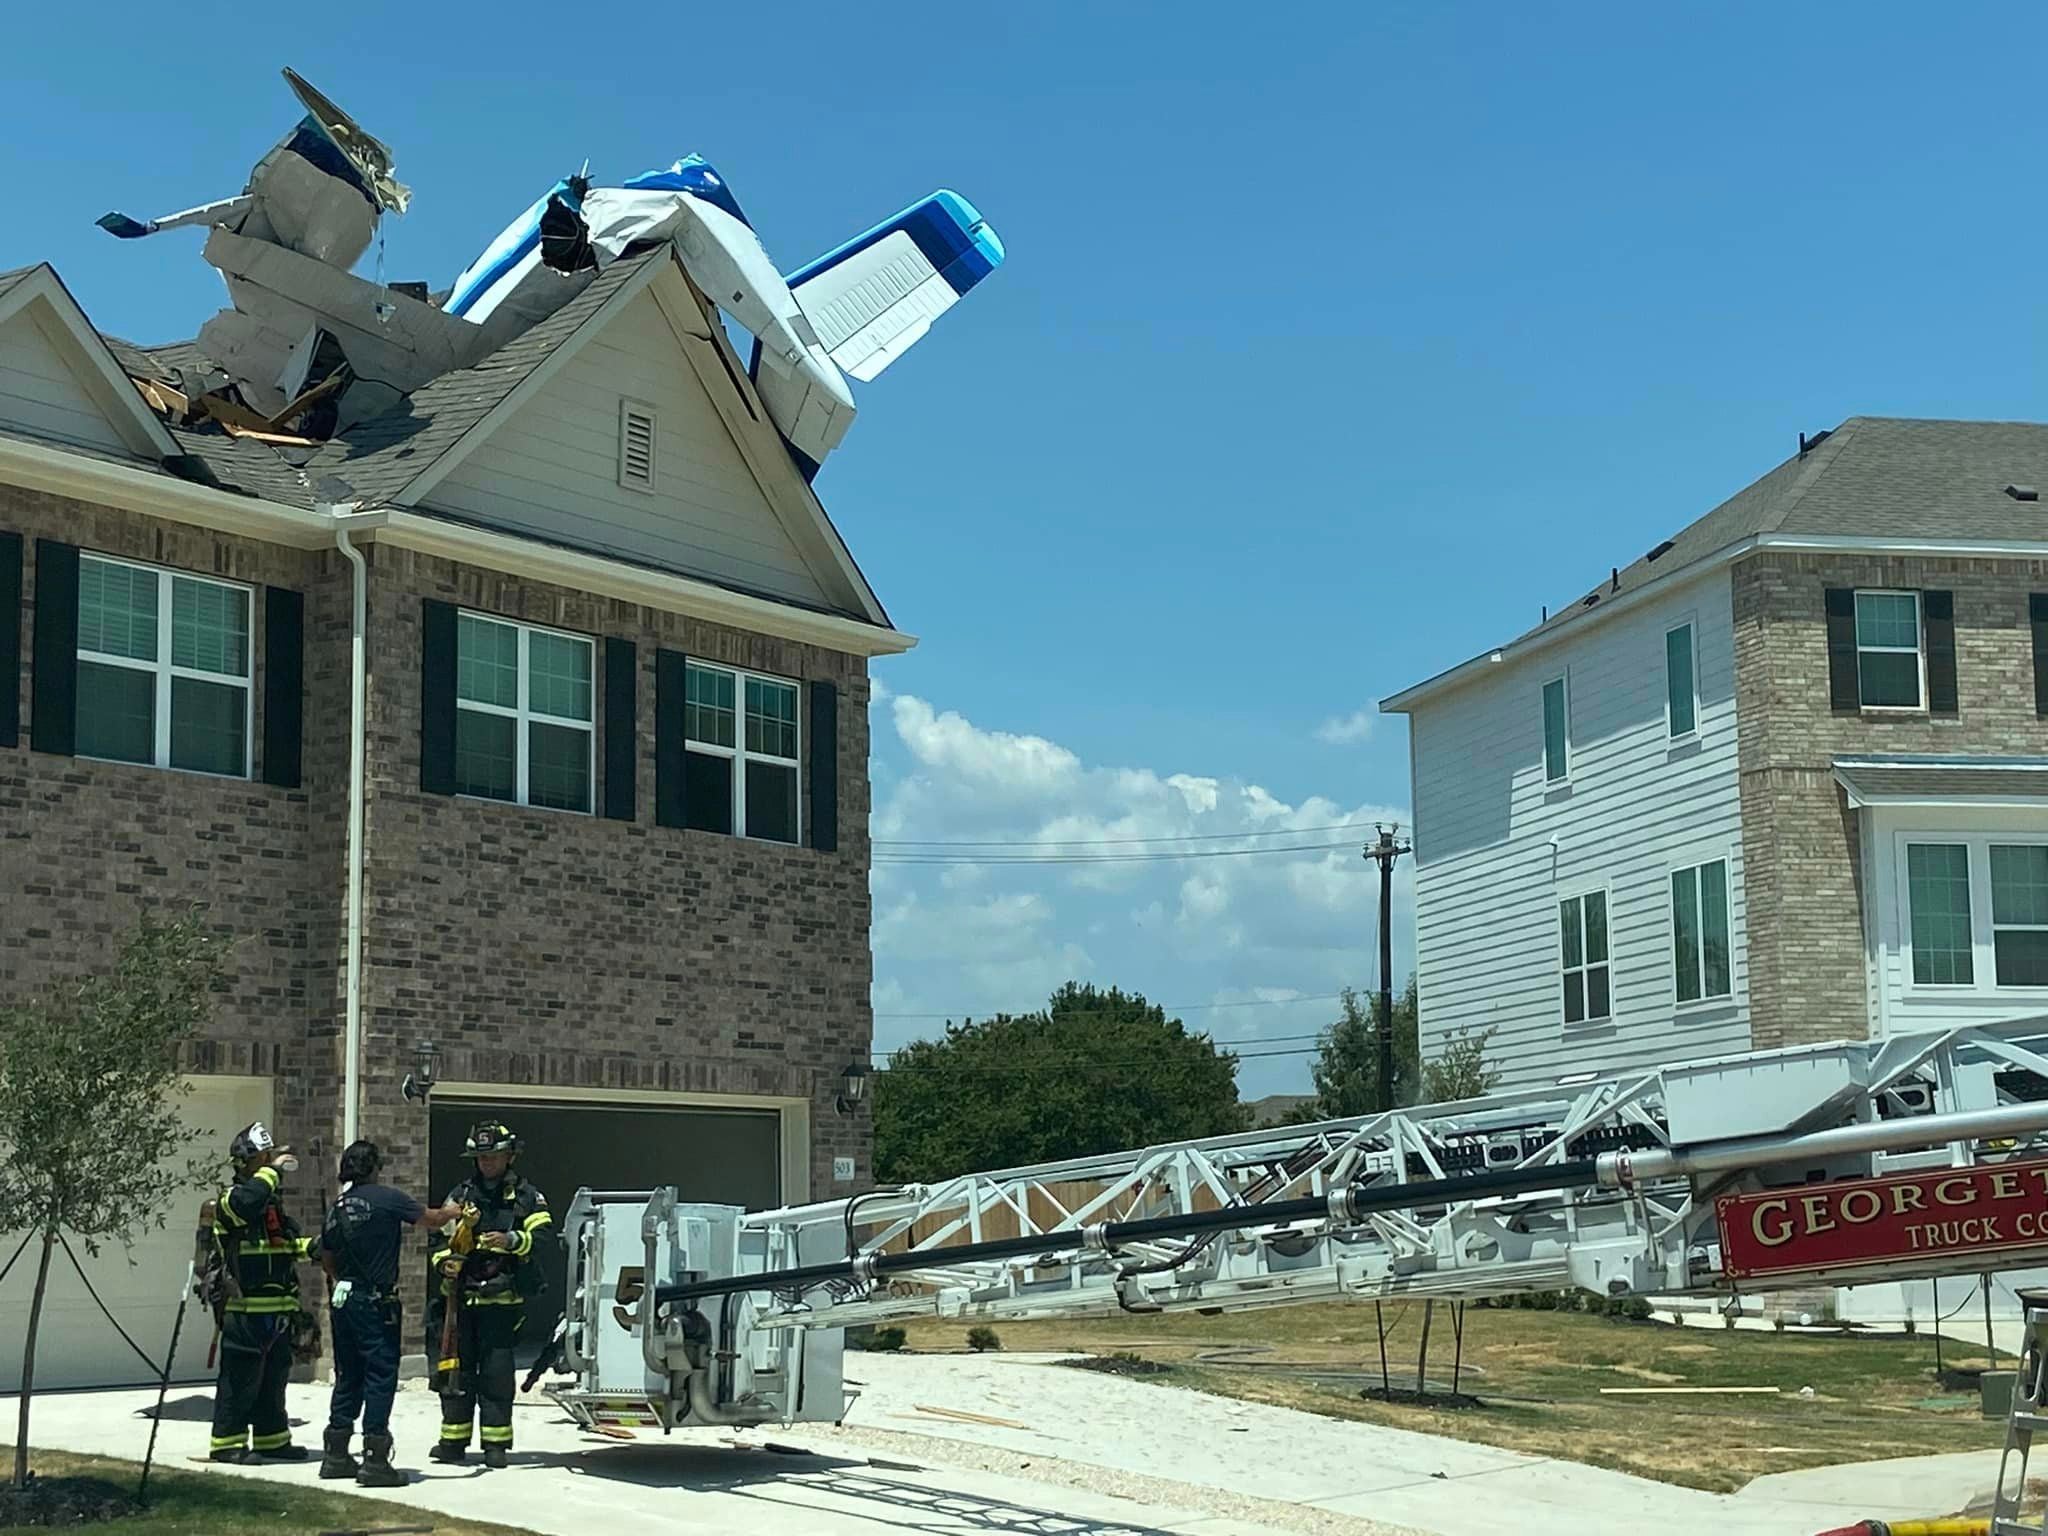 A small plane crashed into a two-story home in Georgetown, Texas, injuring three